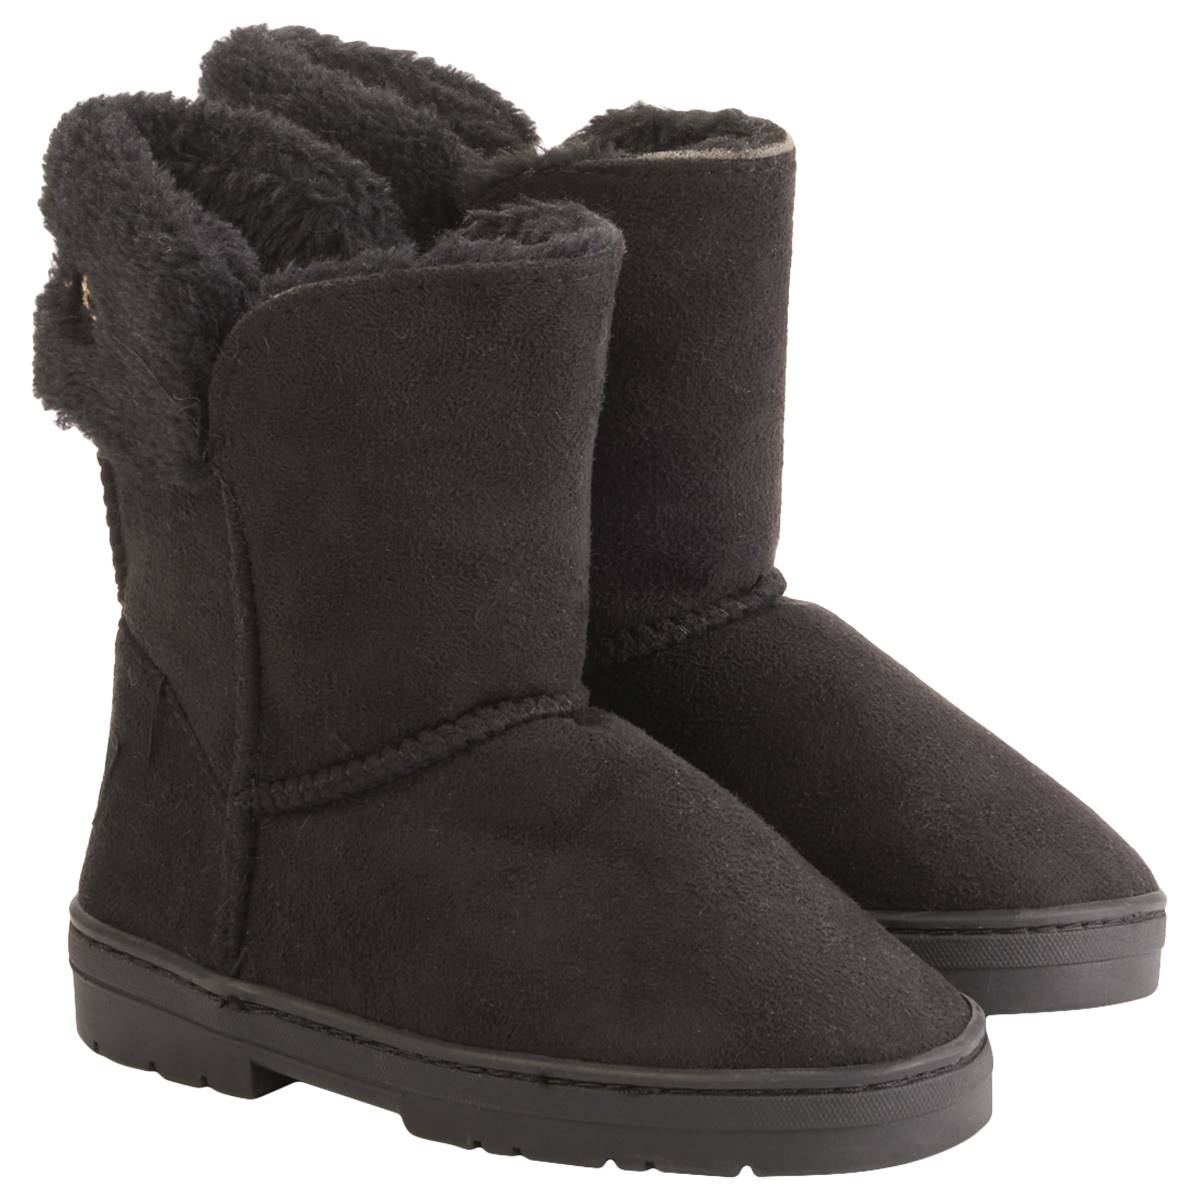 Girls Bebe Microsuede Boots W/Logo Embroidery